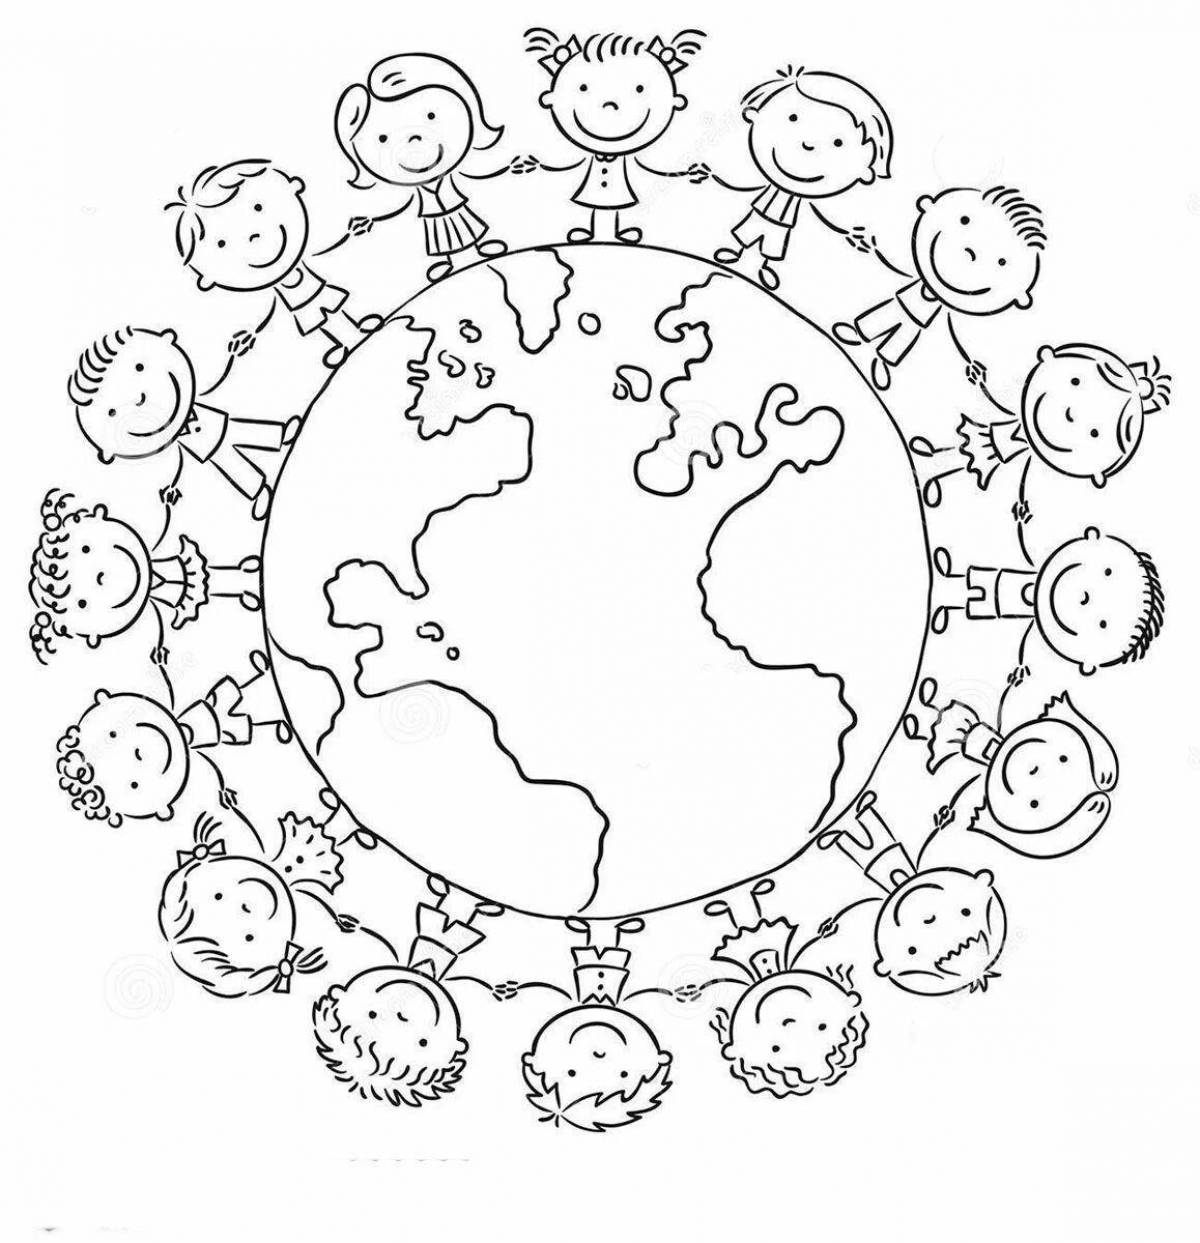 Glowing world on earth coloring page